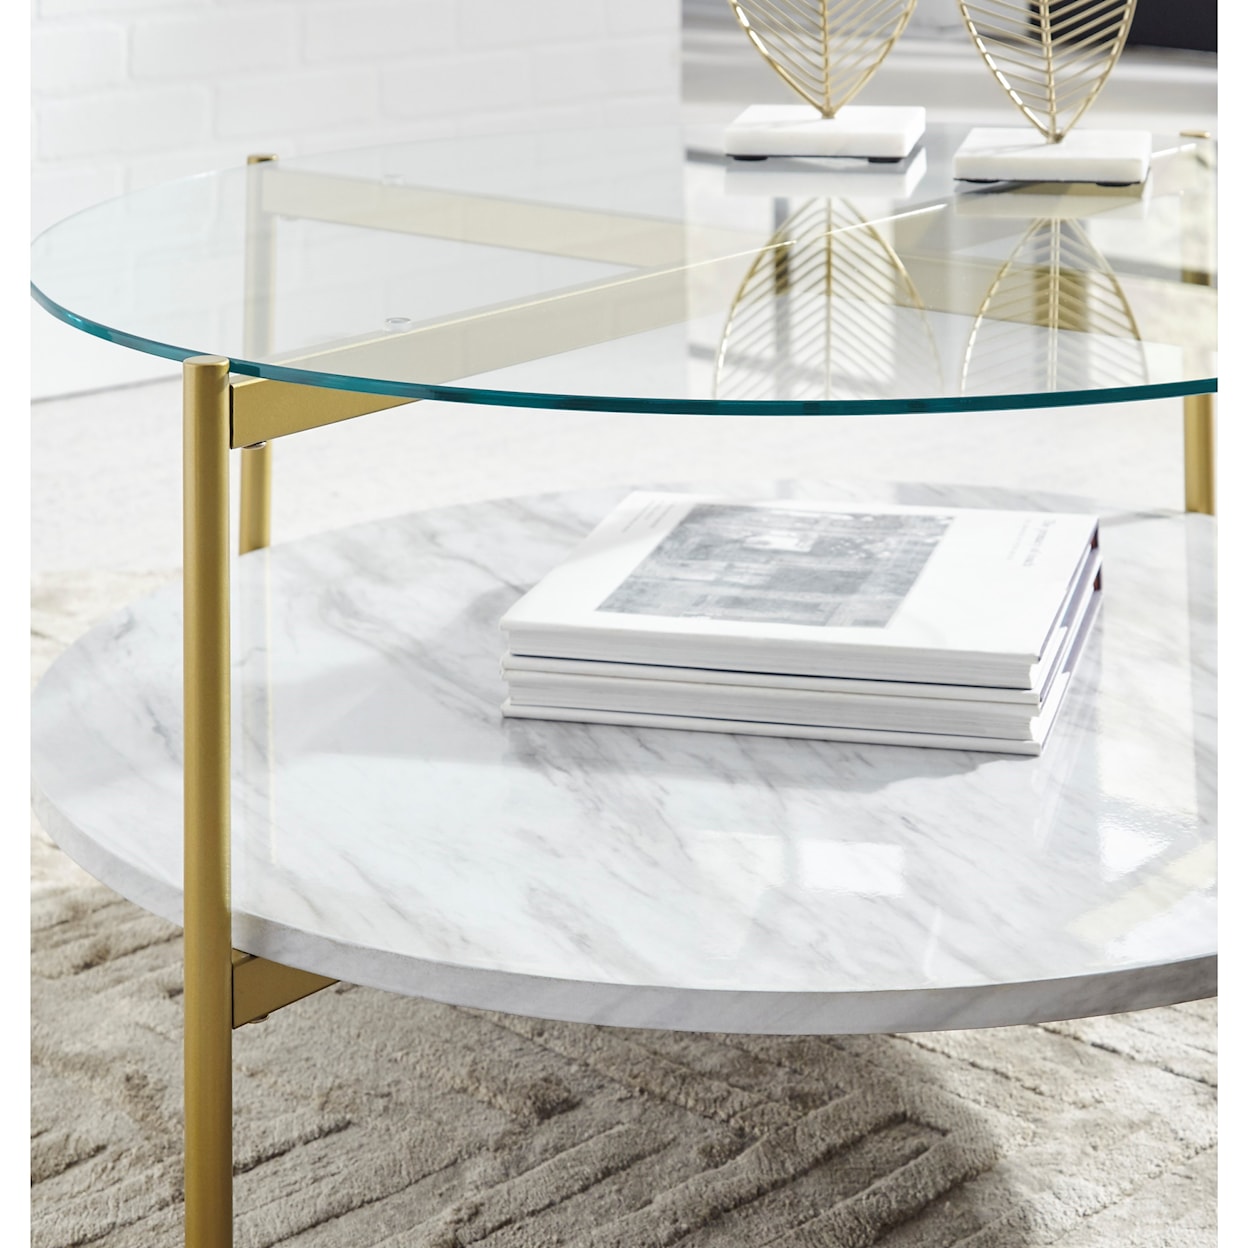 Signature Design by Ashley Wynora Round Cocktail Table